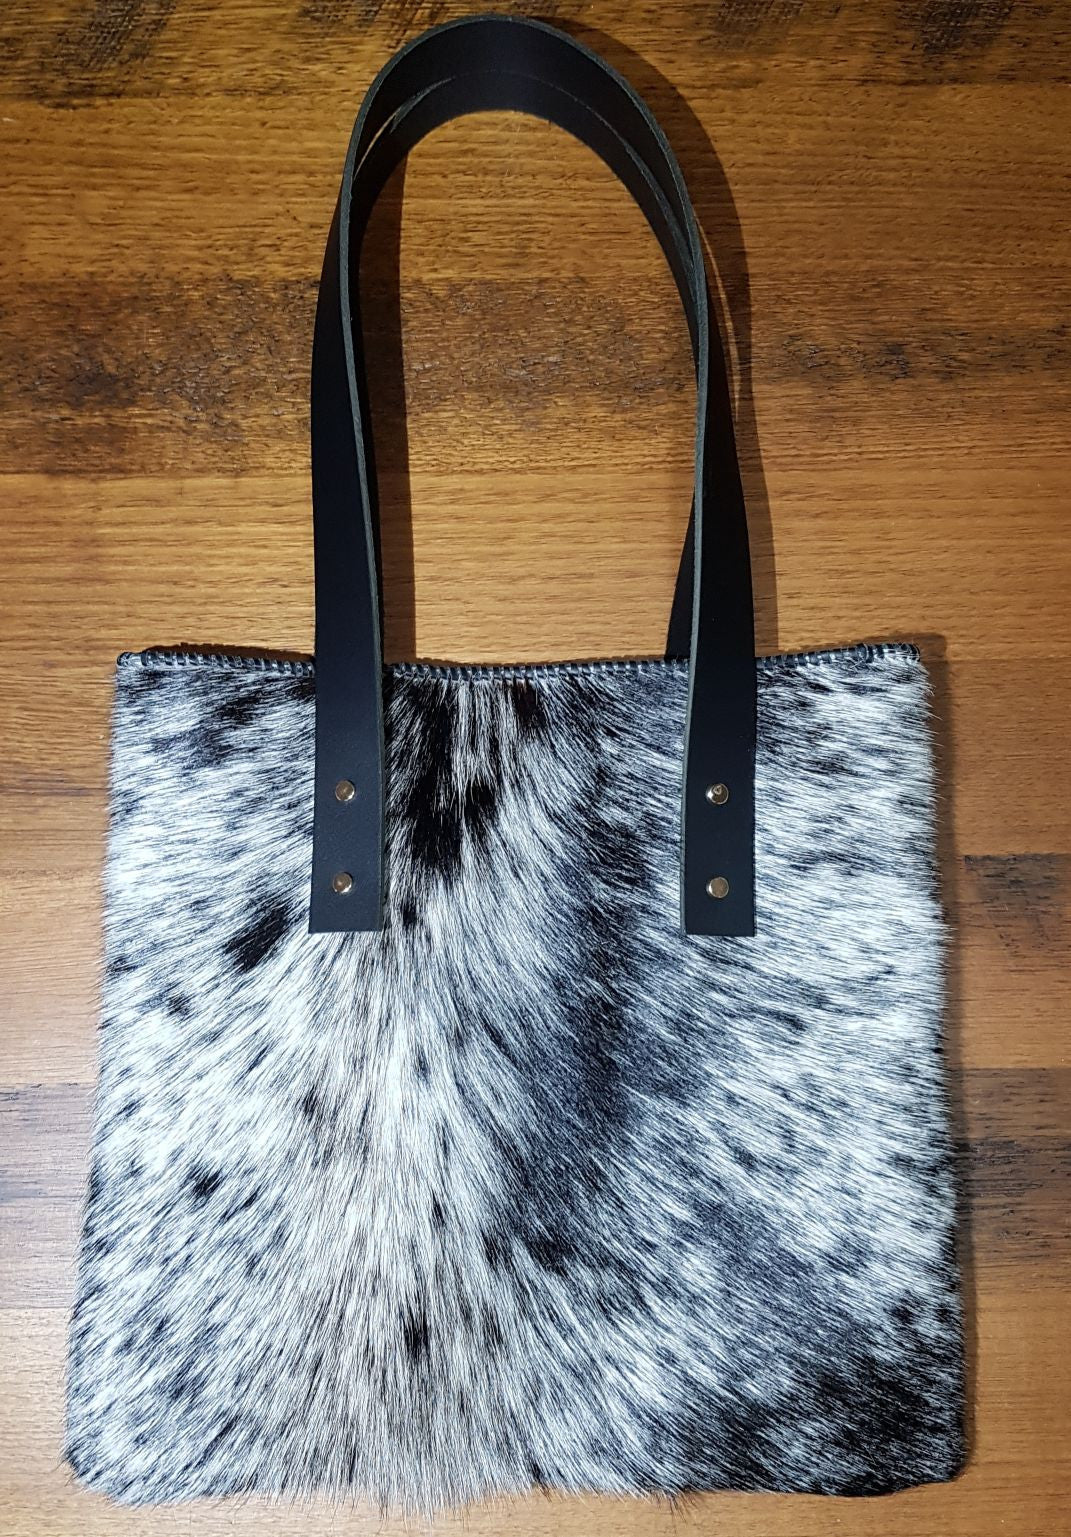 Cowhide Purses hand made from Nguni hide | Zulucow